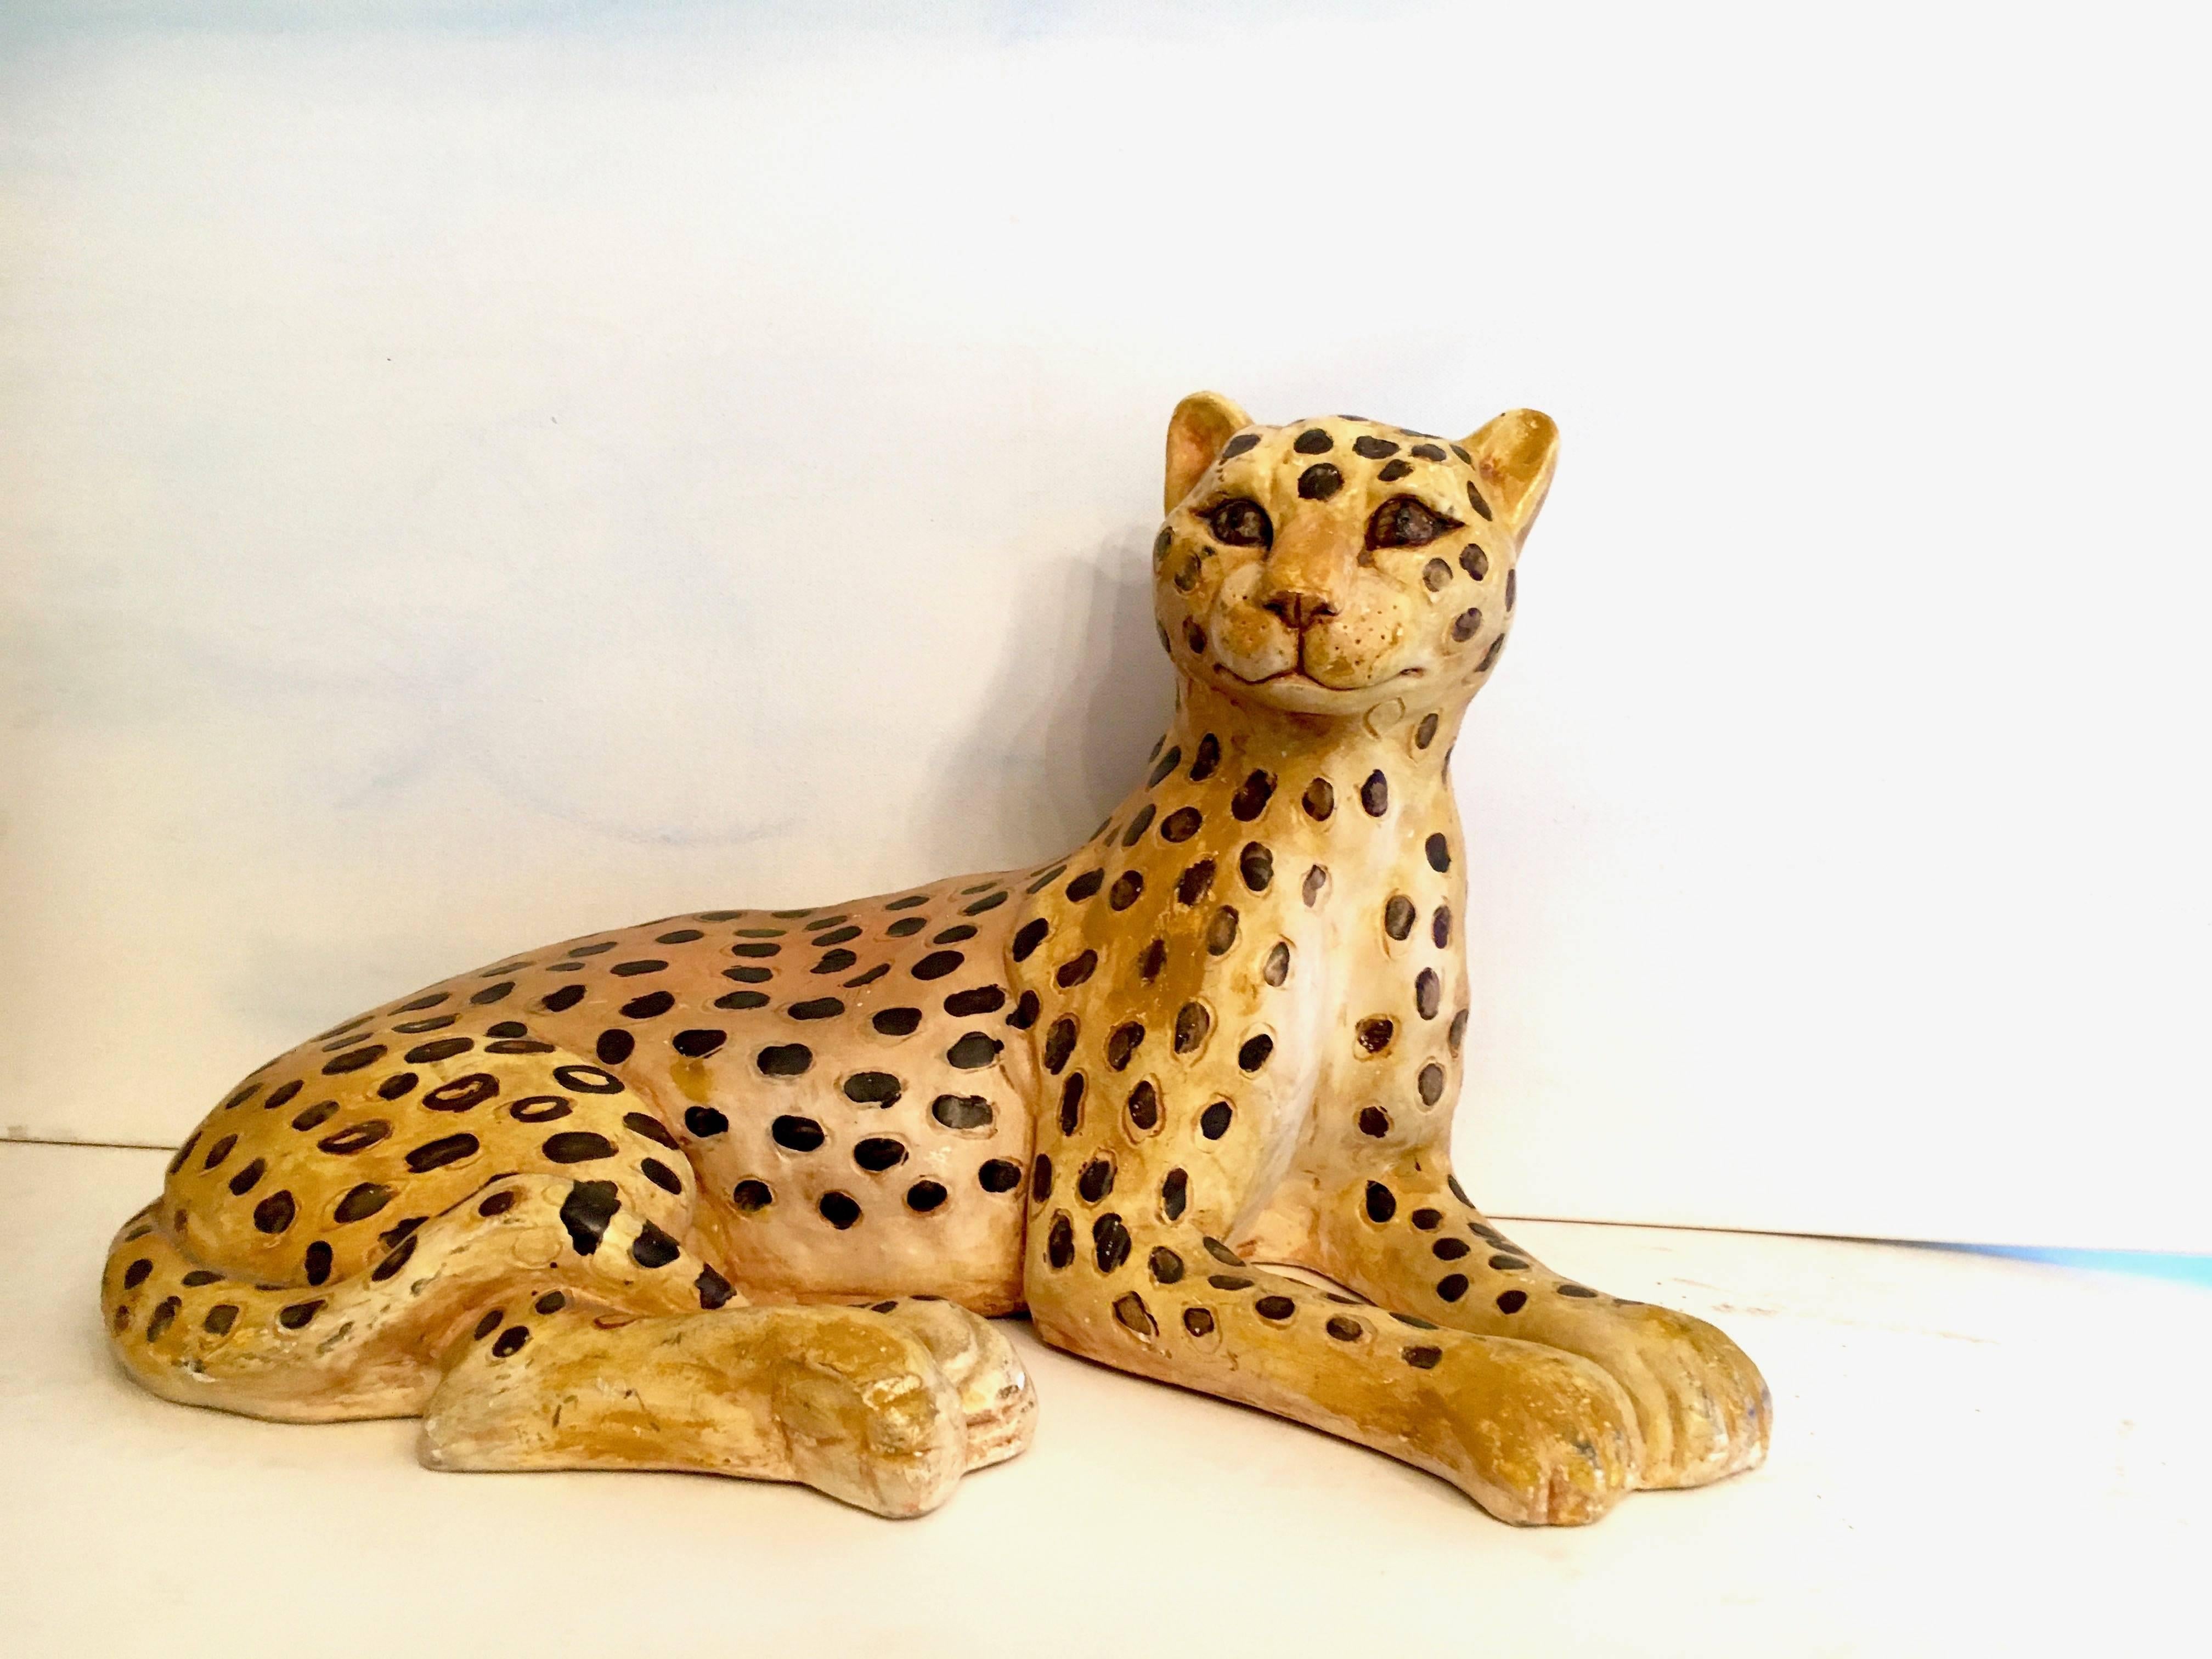 Vintage plaster sculpture of a Lounging Leopard - a midsize piece that will compliment any corner of the house, or lounging under a console, table or childs room - or on a high shelf?

This cat is a great piece and will add with it's uniquely